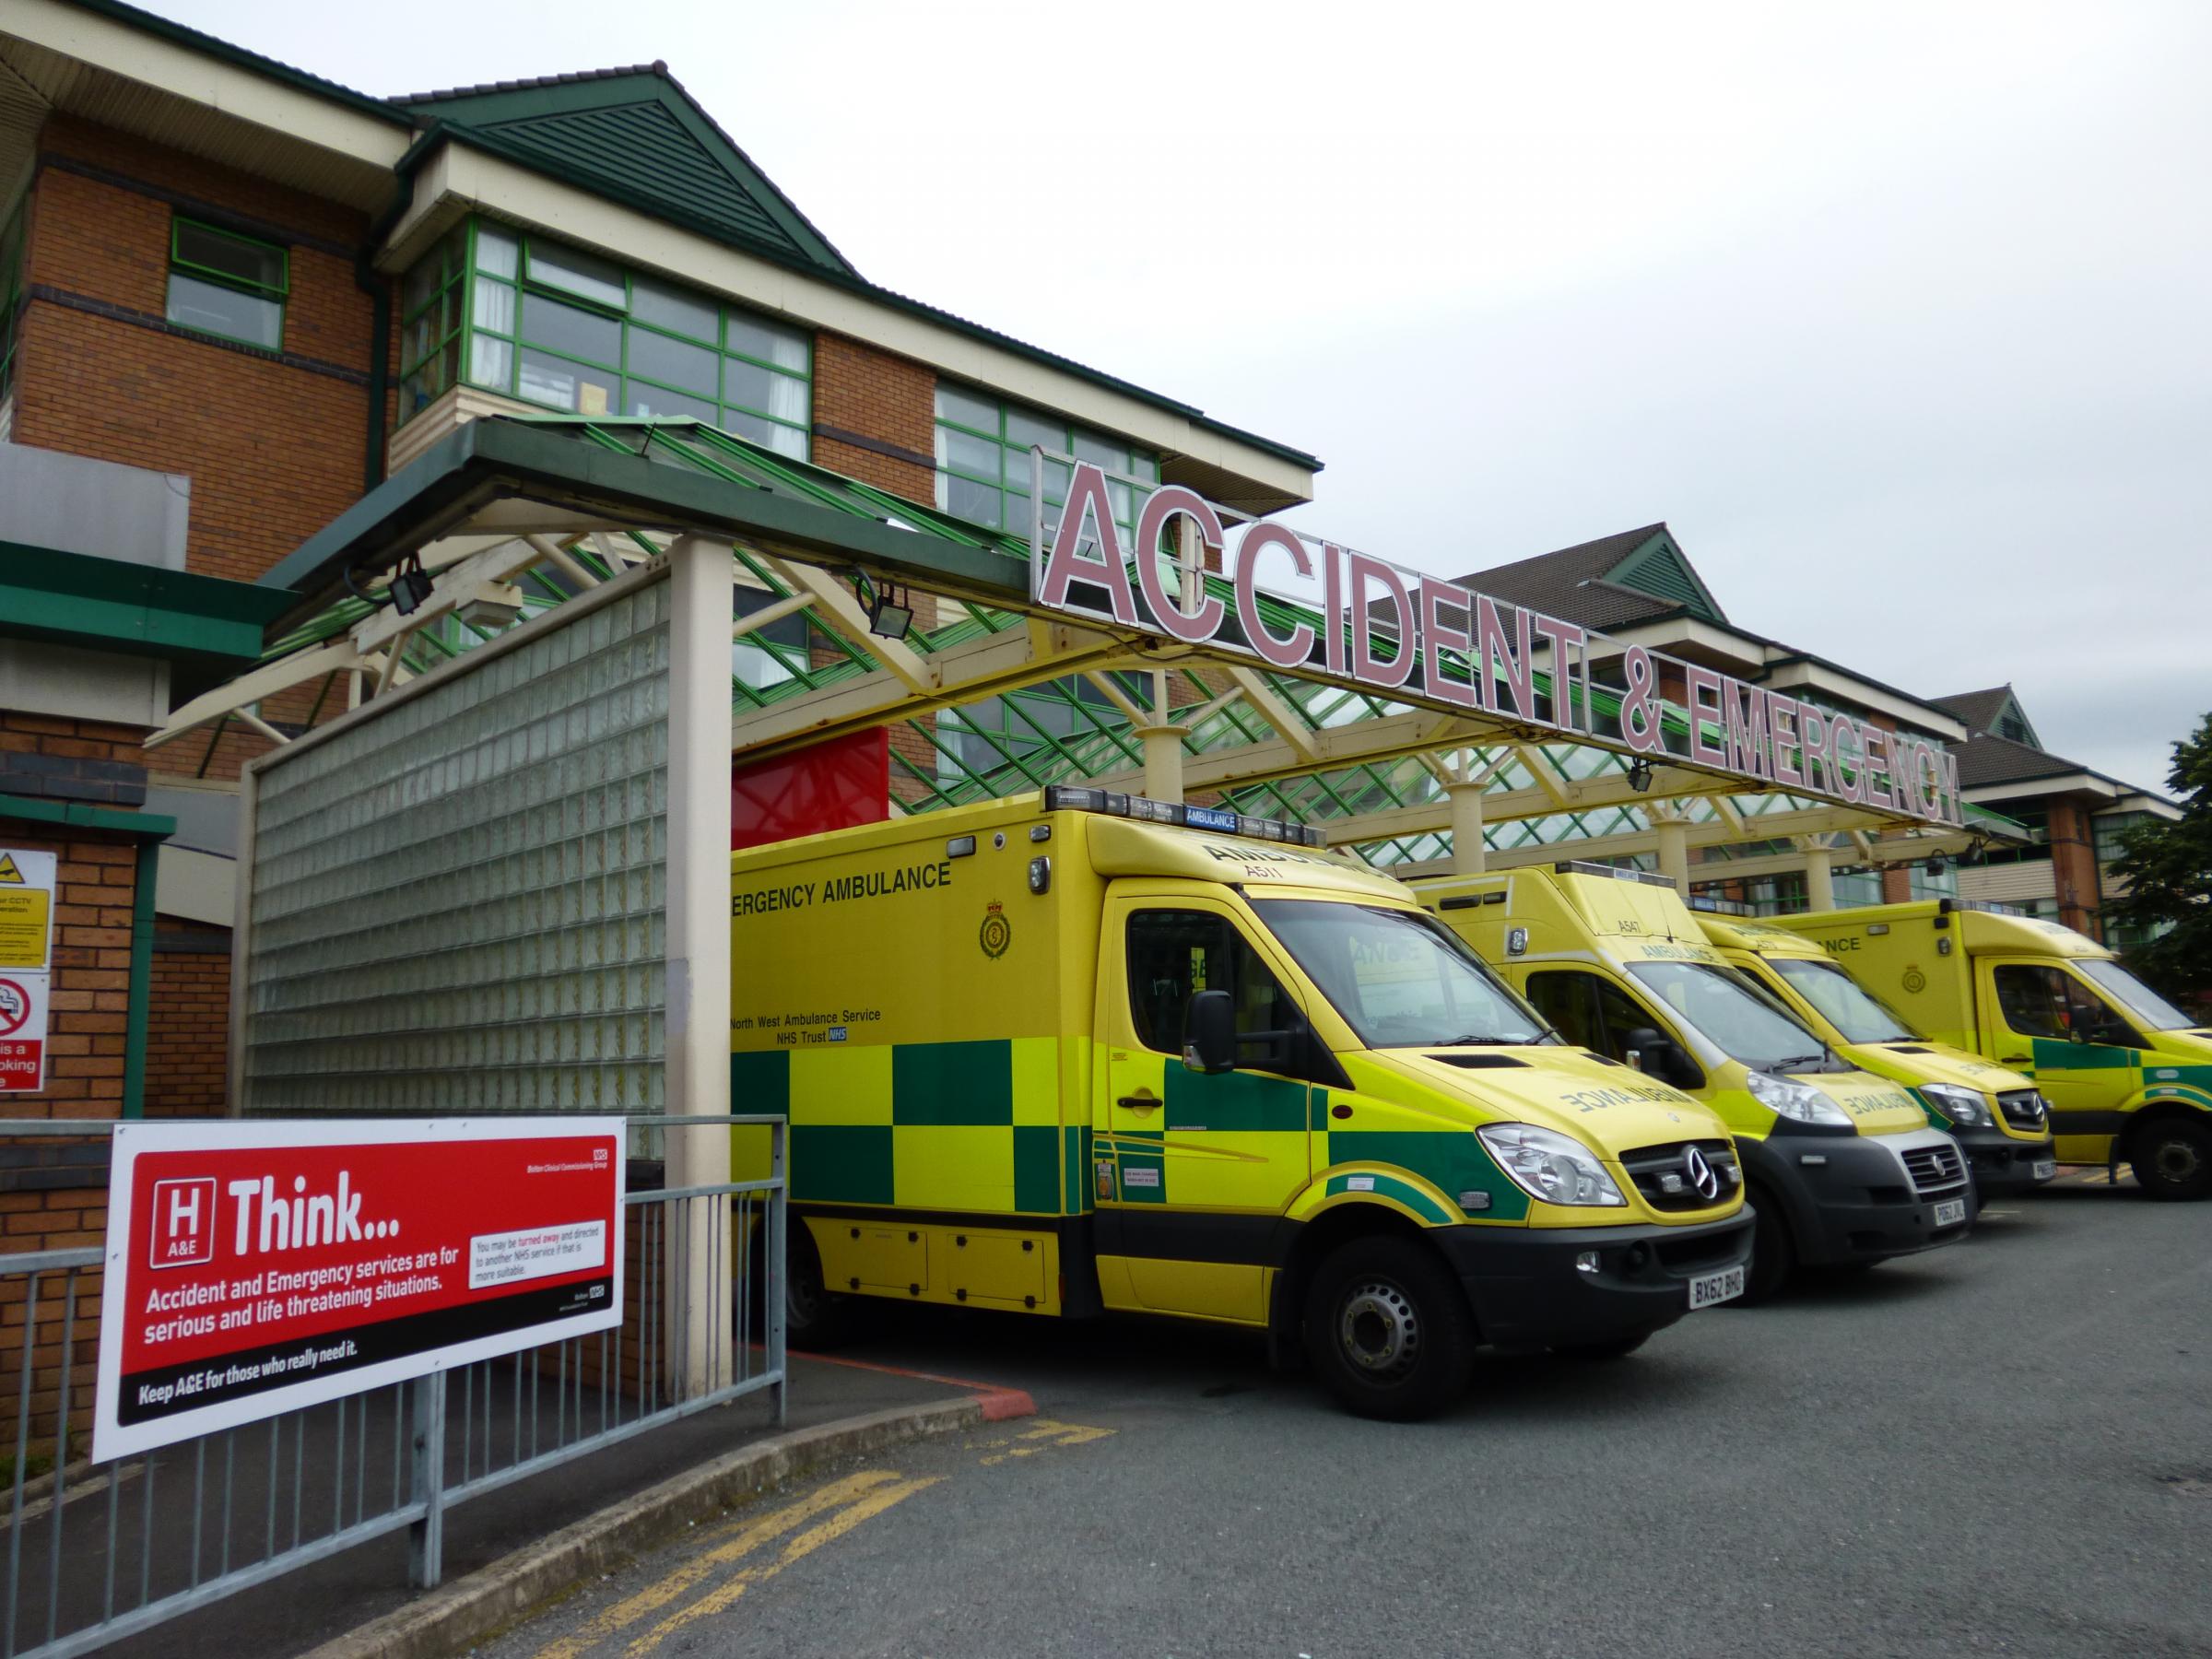 £600000 funding boost for Royal Bolton Hospital A&E to ease winter pressure - The Bolton News